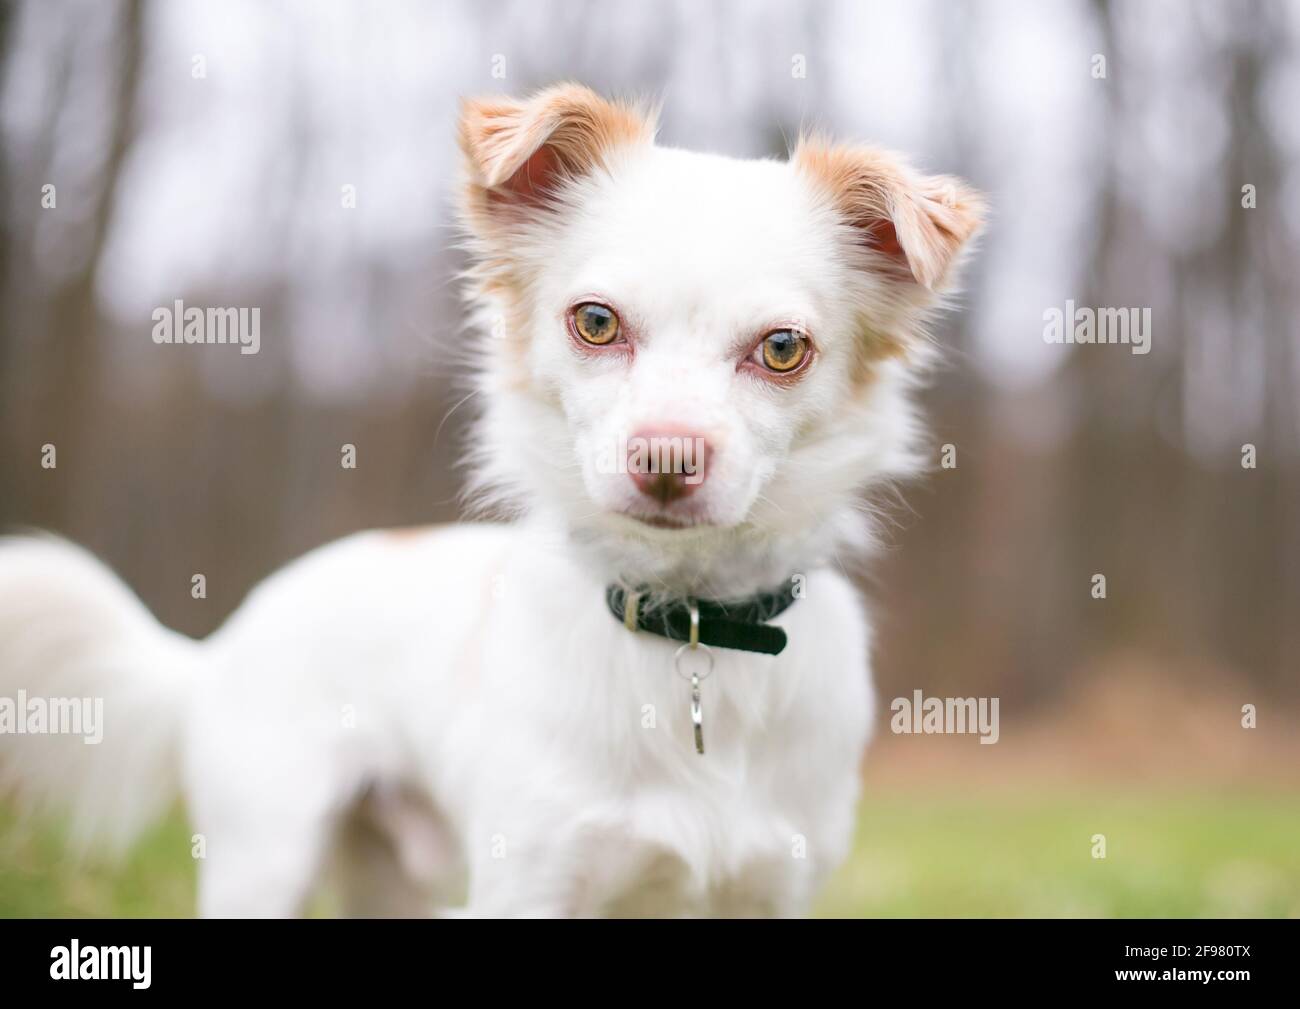 A Chihuahua mixed breed dog wearing a collar and tag, looking at the camera with a head tilt Stock Photo